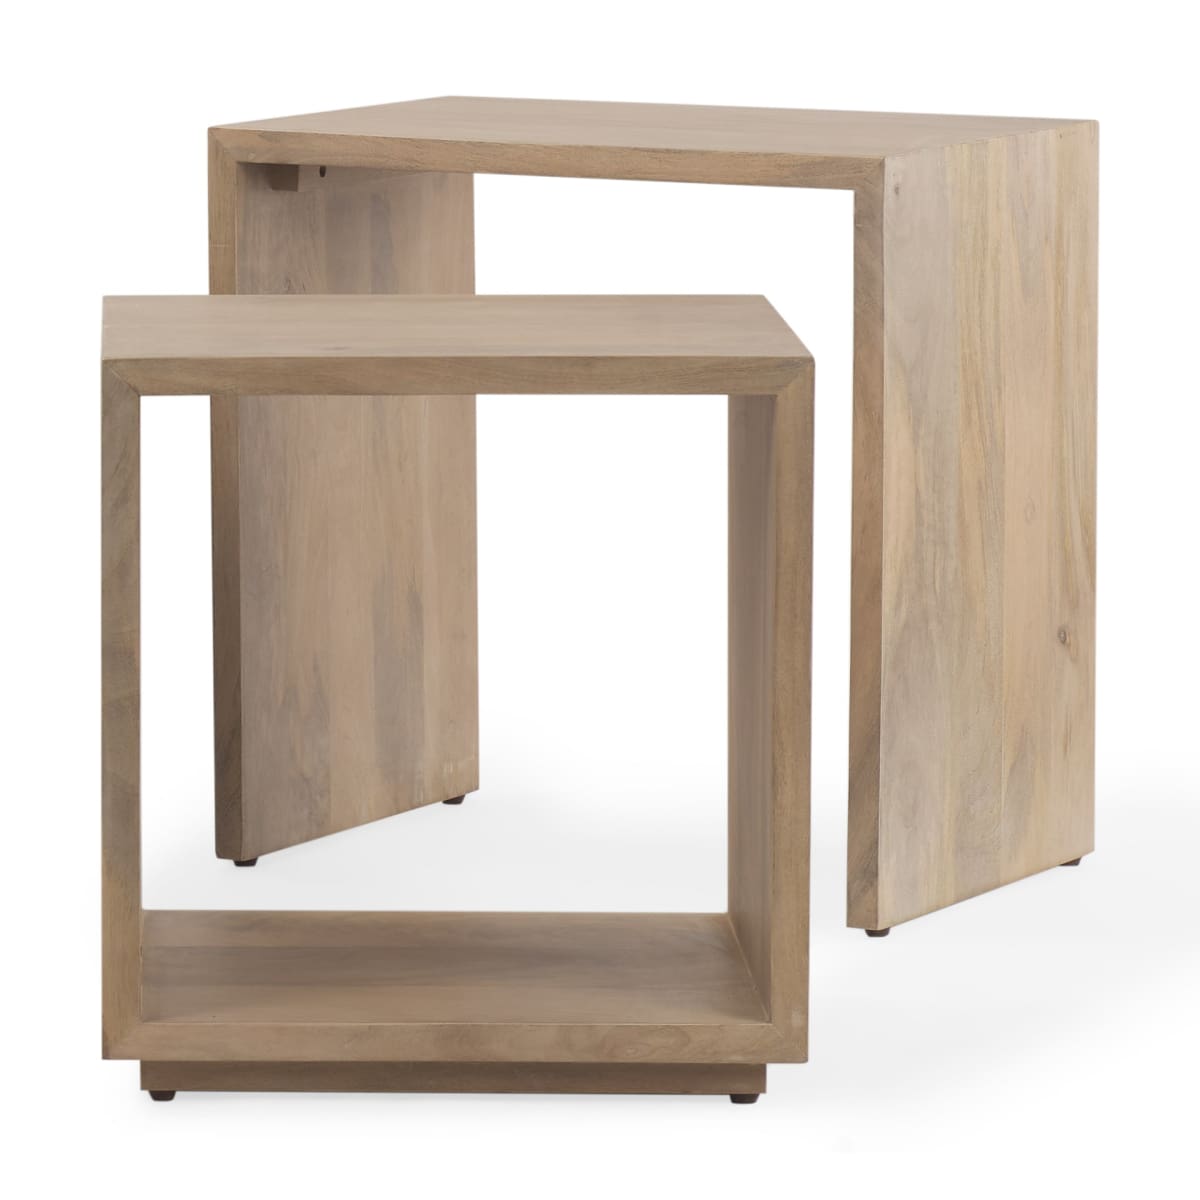 Alanna Accent Table Light Brown Wood - accent-tables